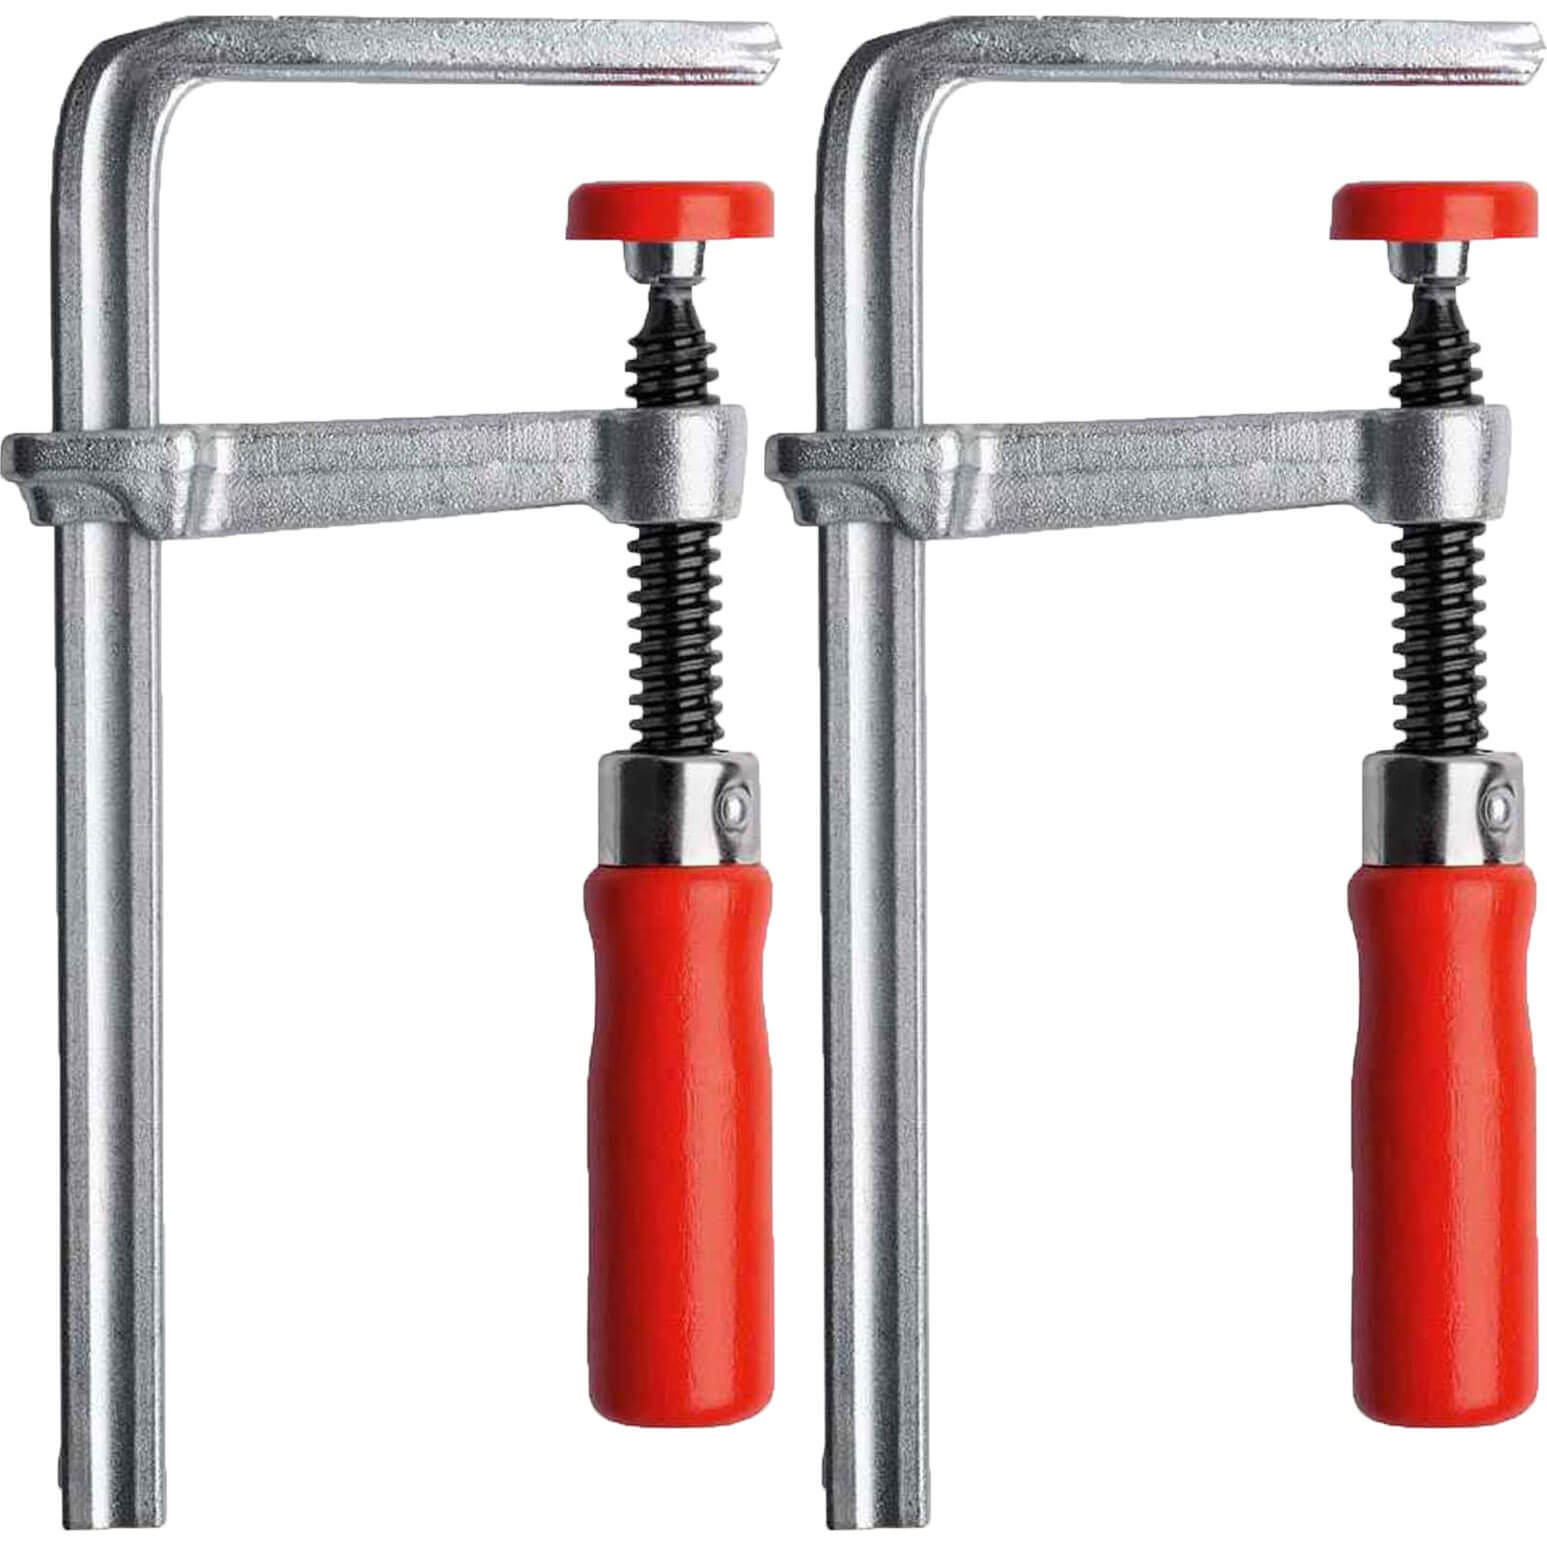 Photo of Bessey 2 Piece Gtr Guide Rail Clamp Set